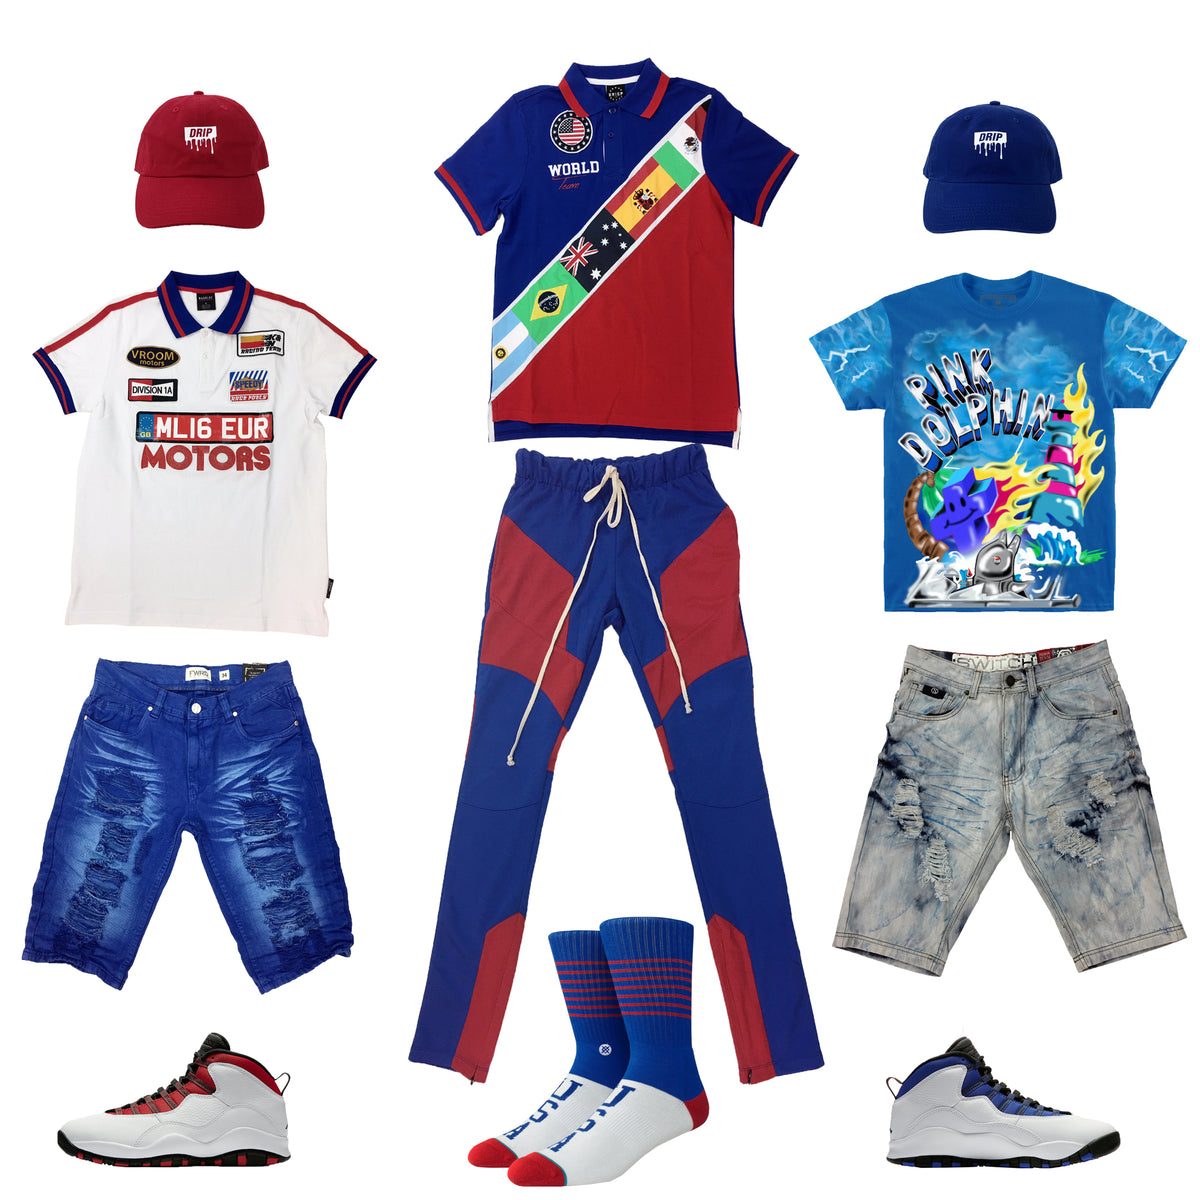 Air Jordan 10 Retro Russell Westbrook Class of 2006 Outfit